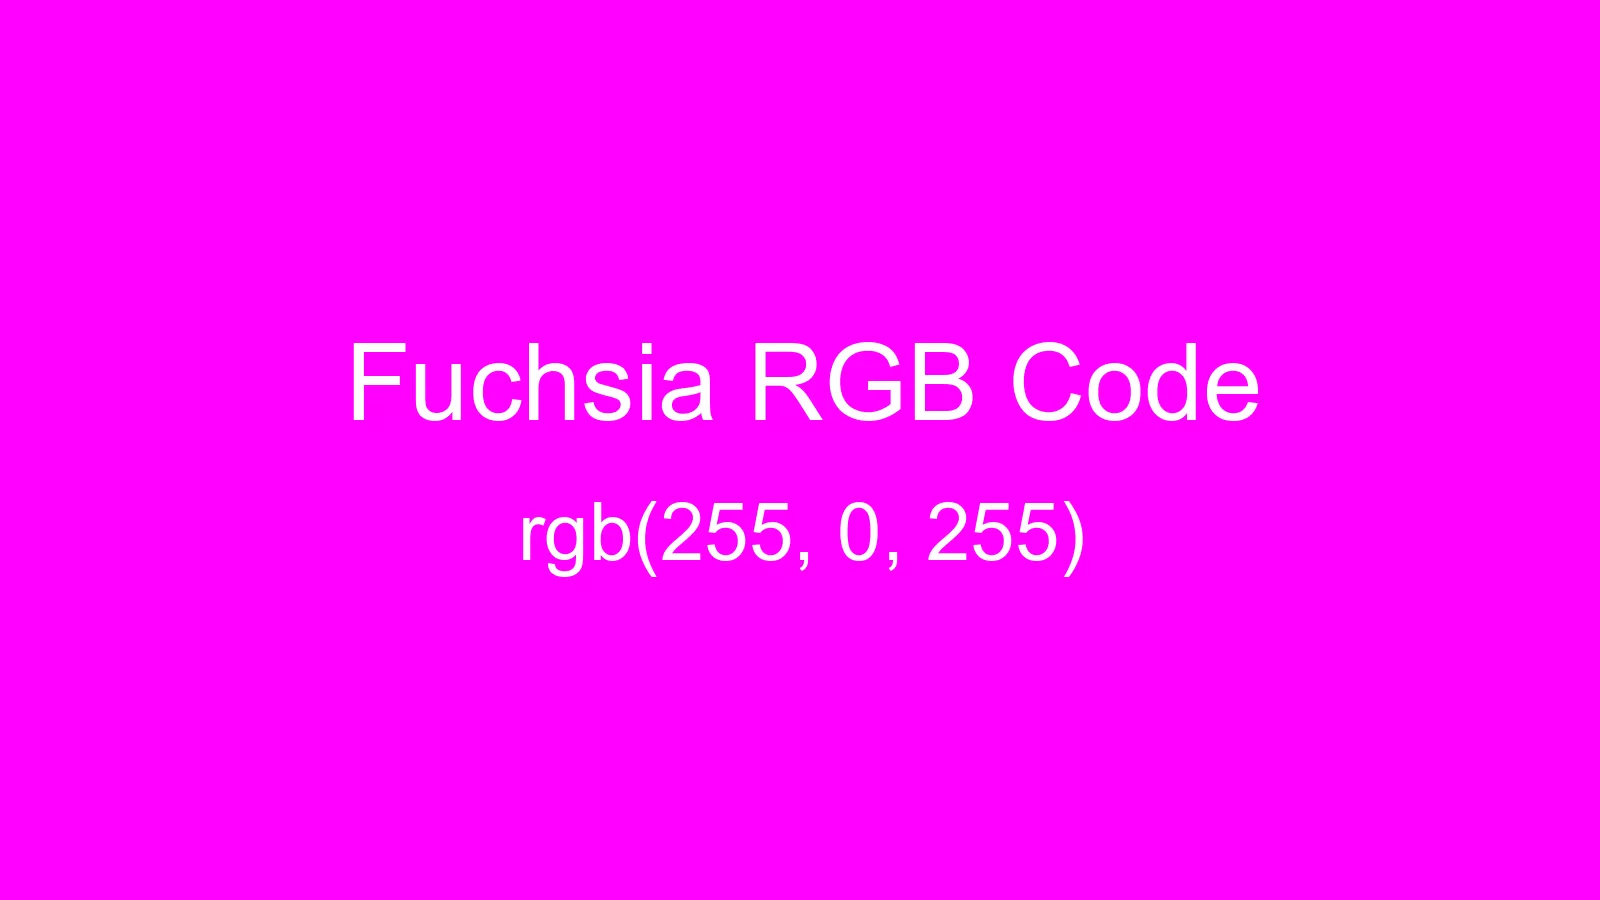 preview image of Fuchsia color and RGB code